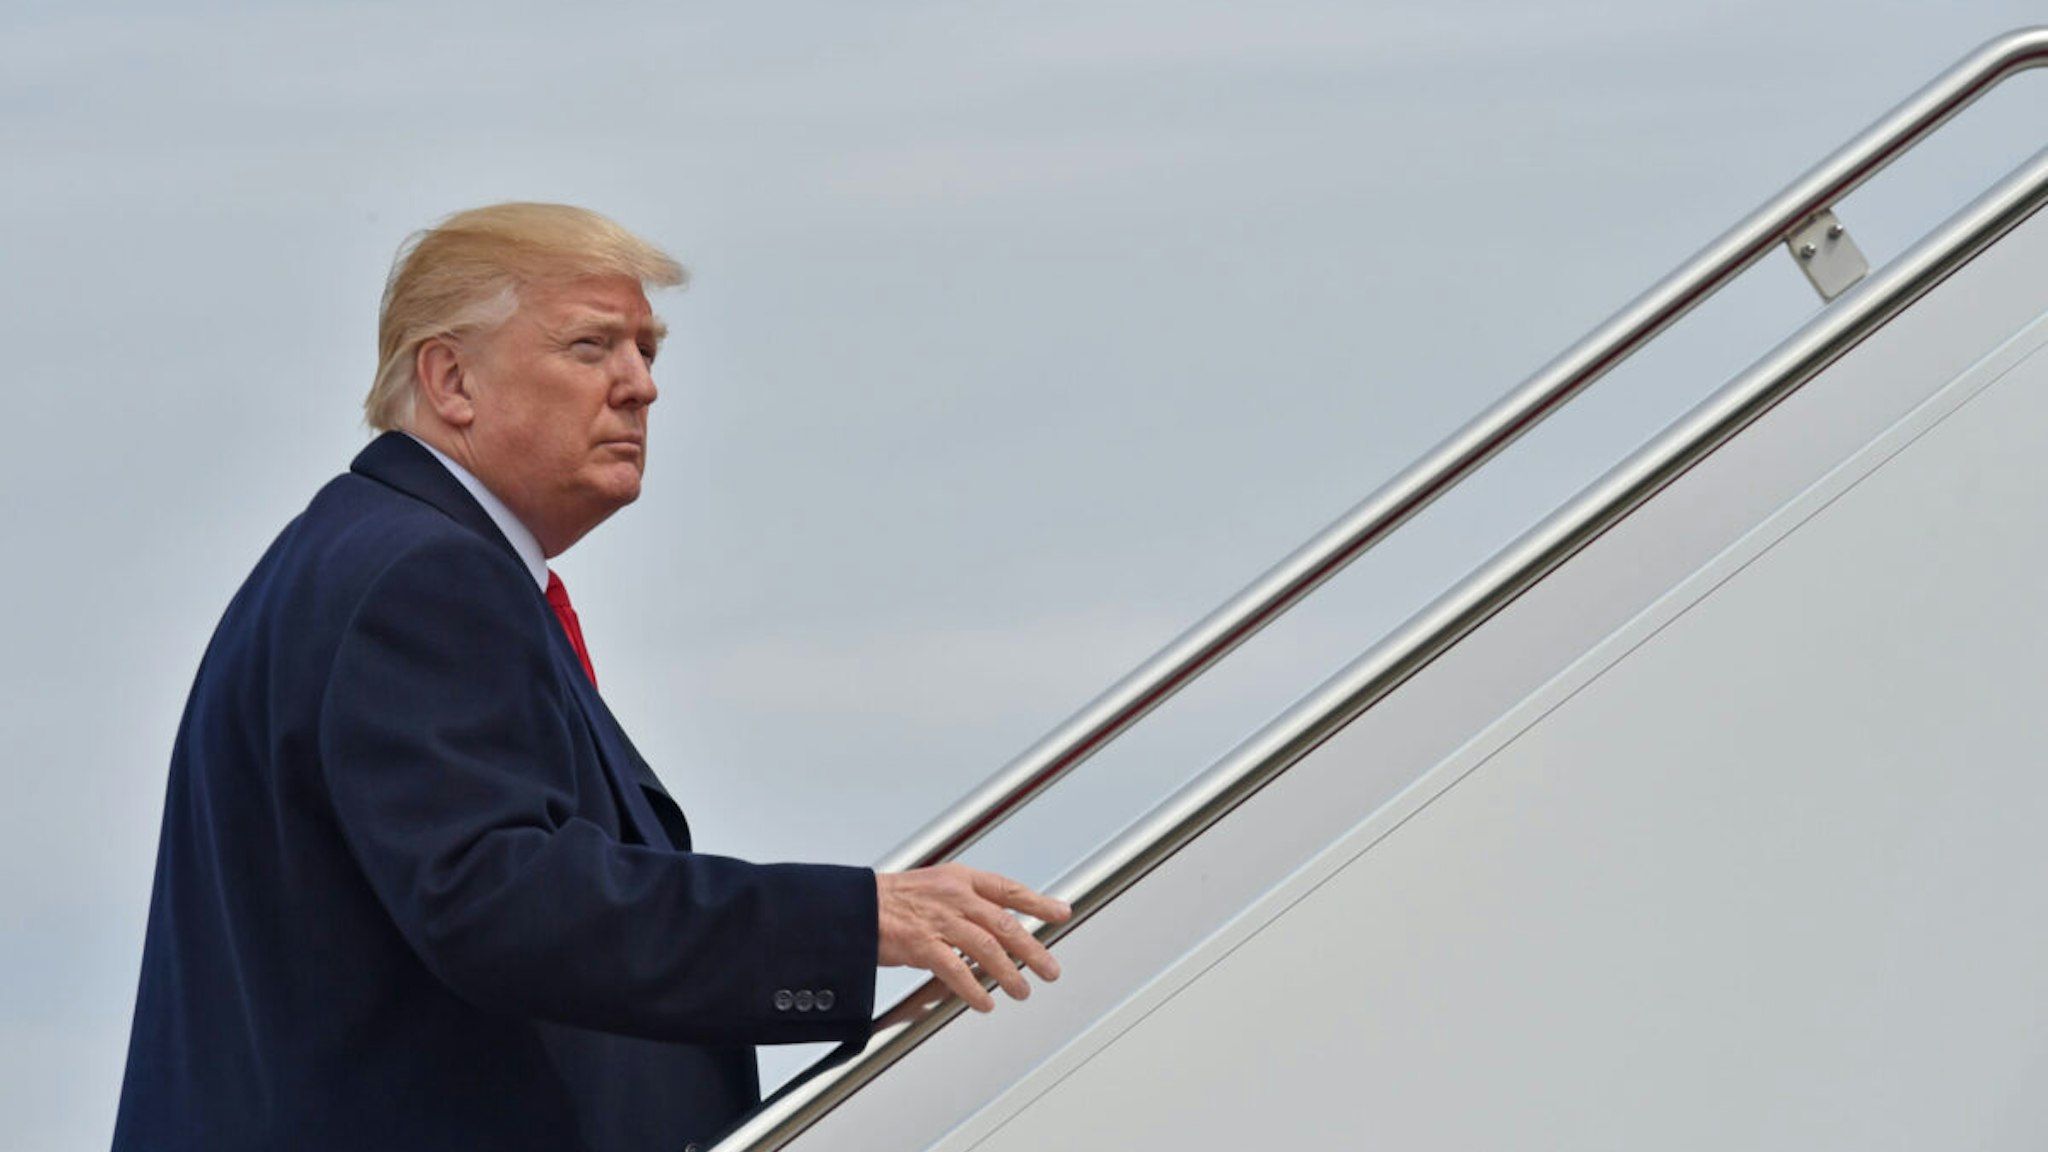 US President Donald Trump boards Air Force One at Andrews Air Force Base in Maryland on March 29, 2018, on his way to Cleveland.